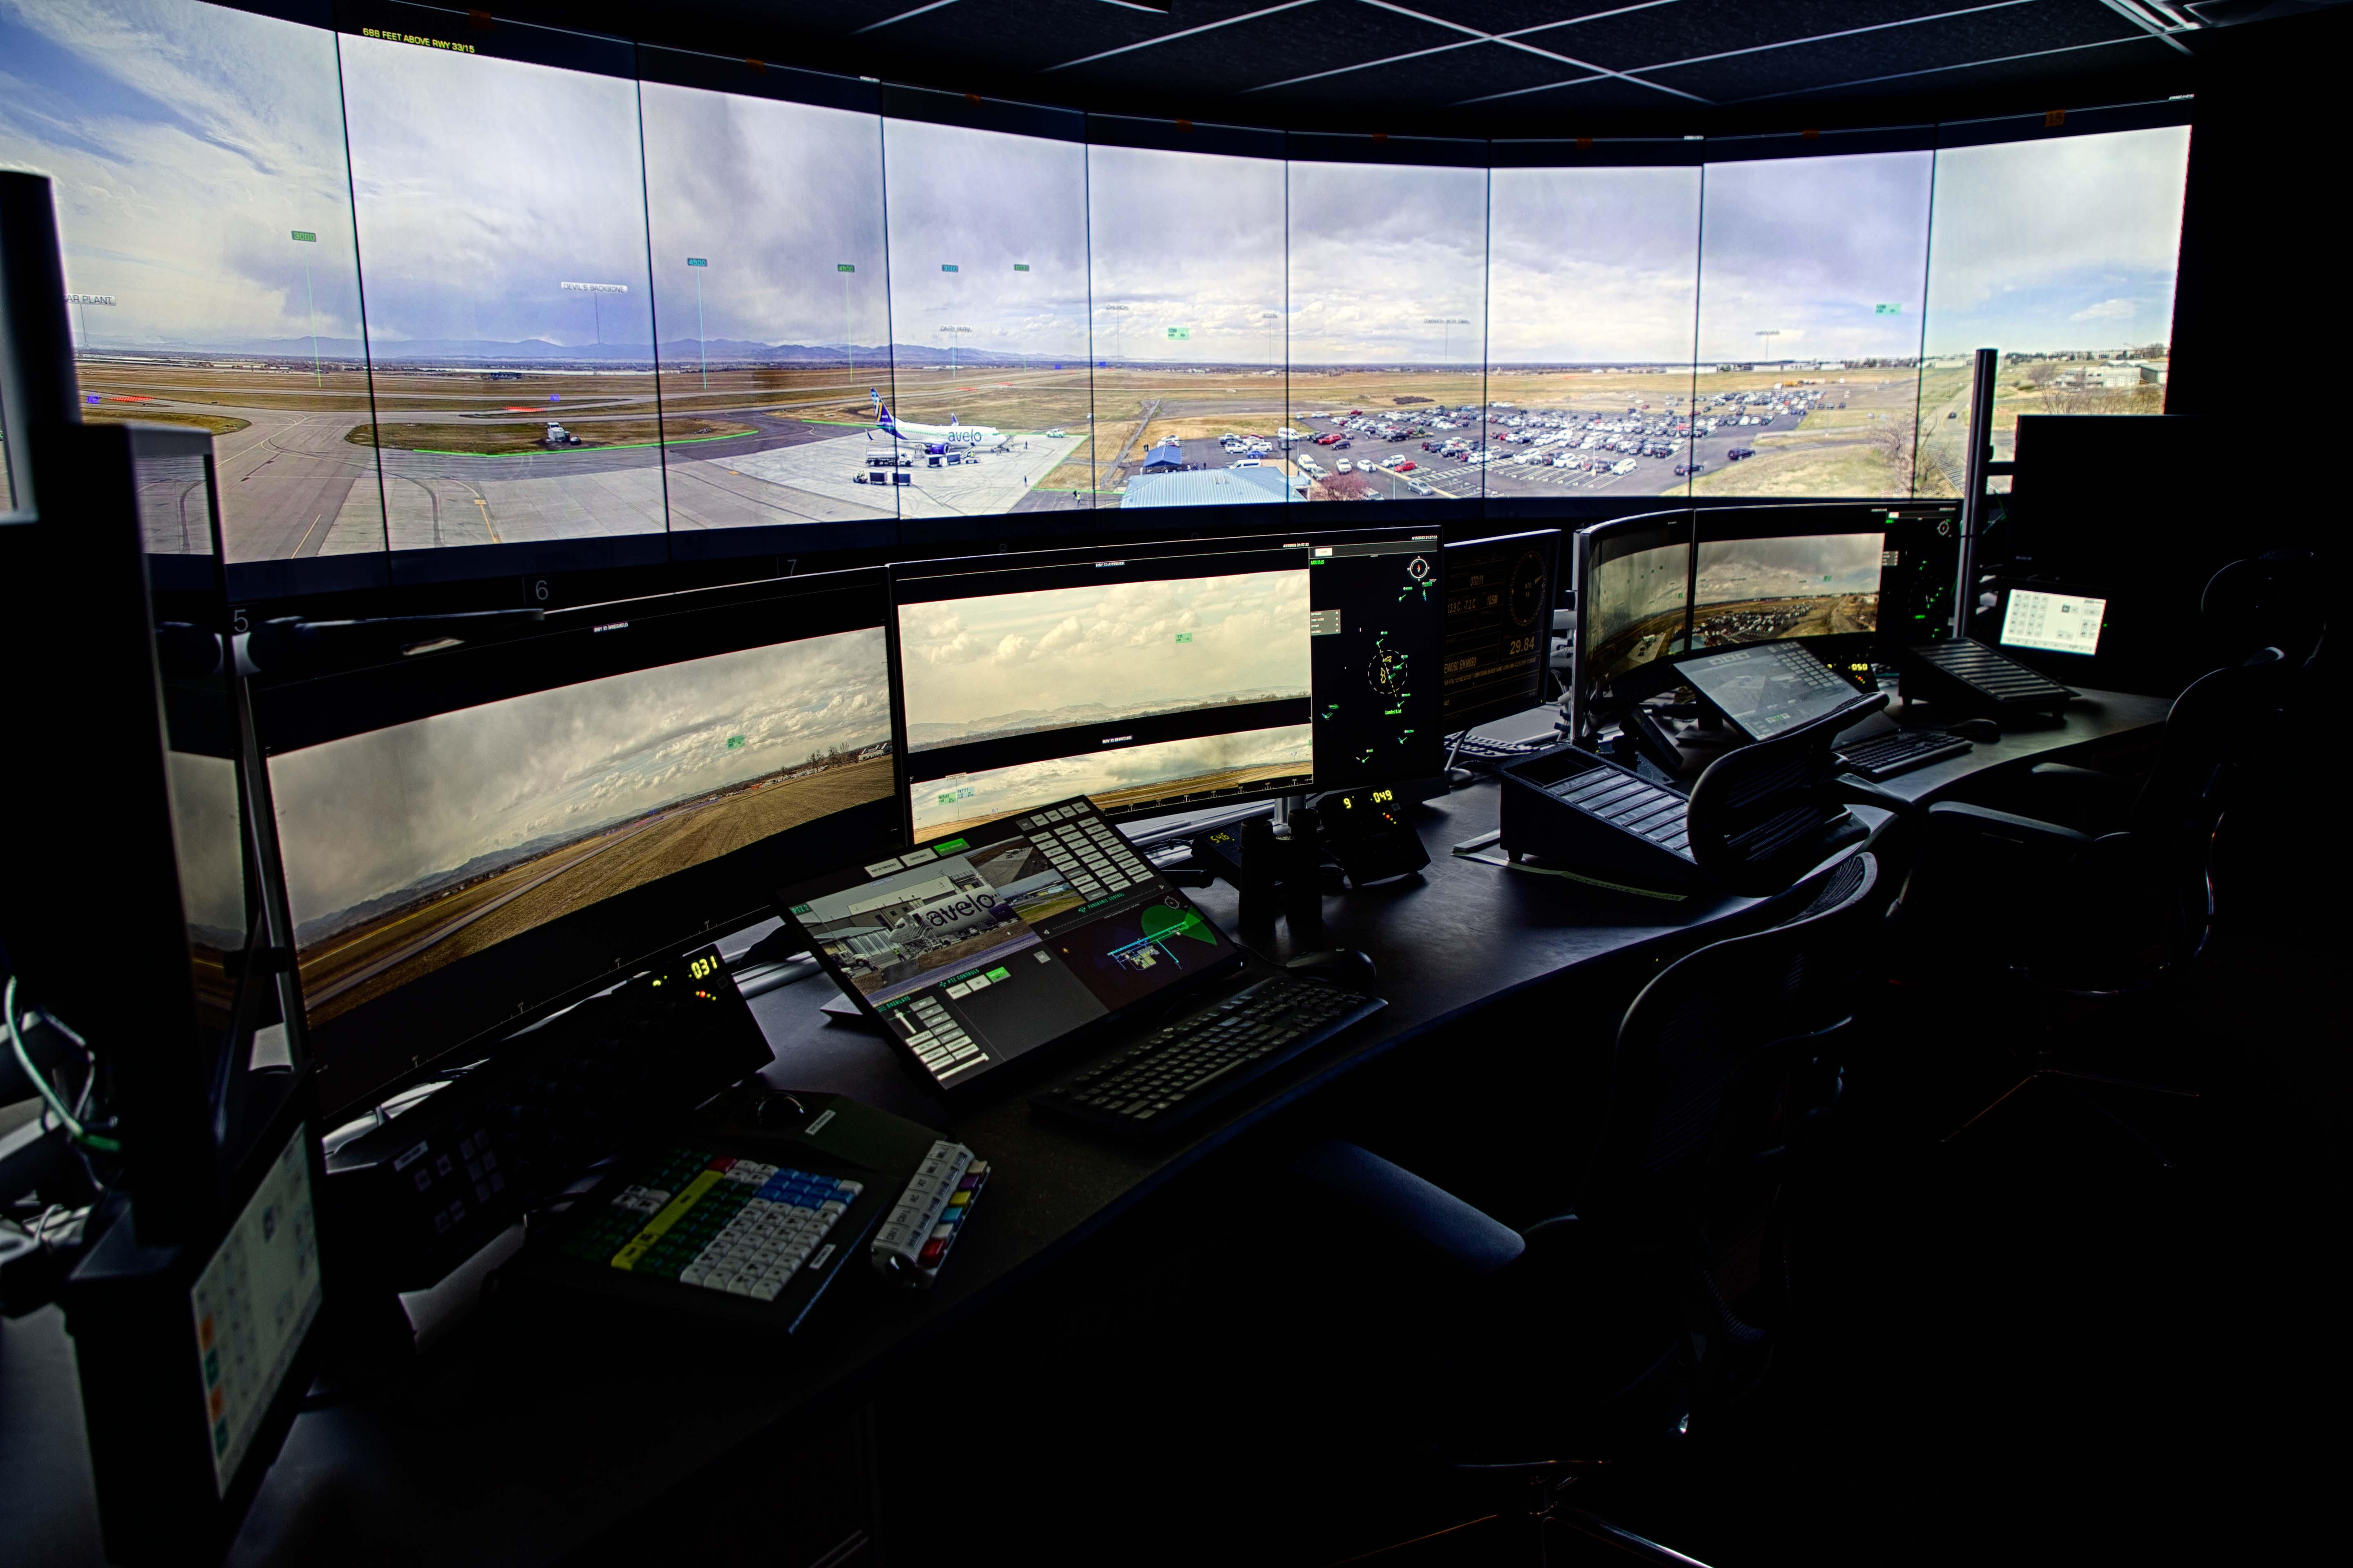 Image of the video wall replicating the out the window view for air traffic control